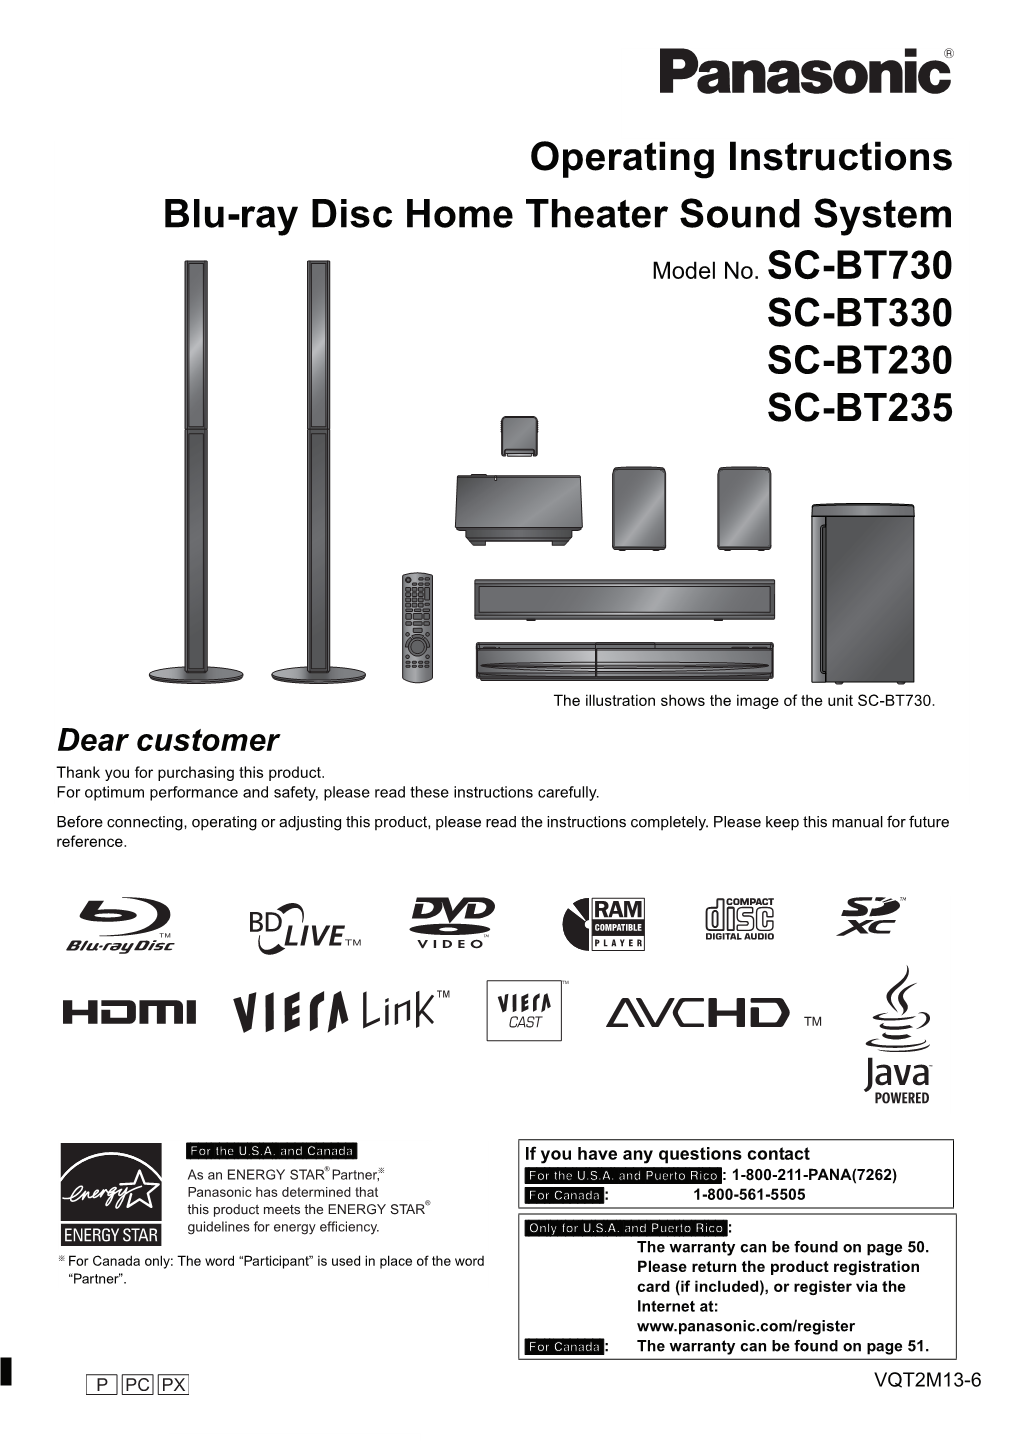 Operating Instructions Blu-Ray Disc Home Theater Sound System SC-BT330 SC-BT230 SC-BT235